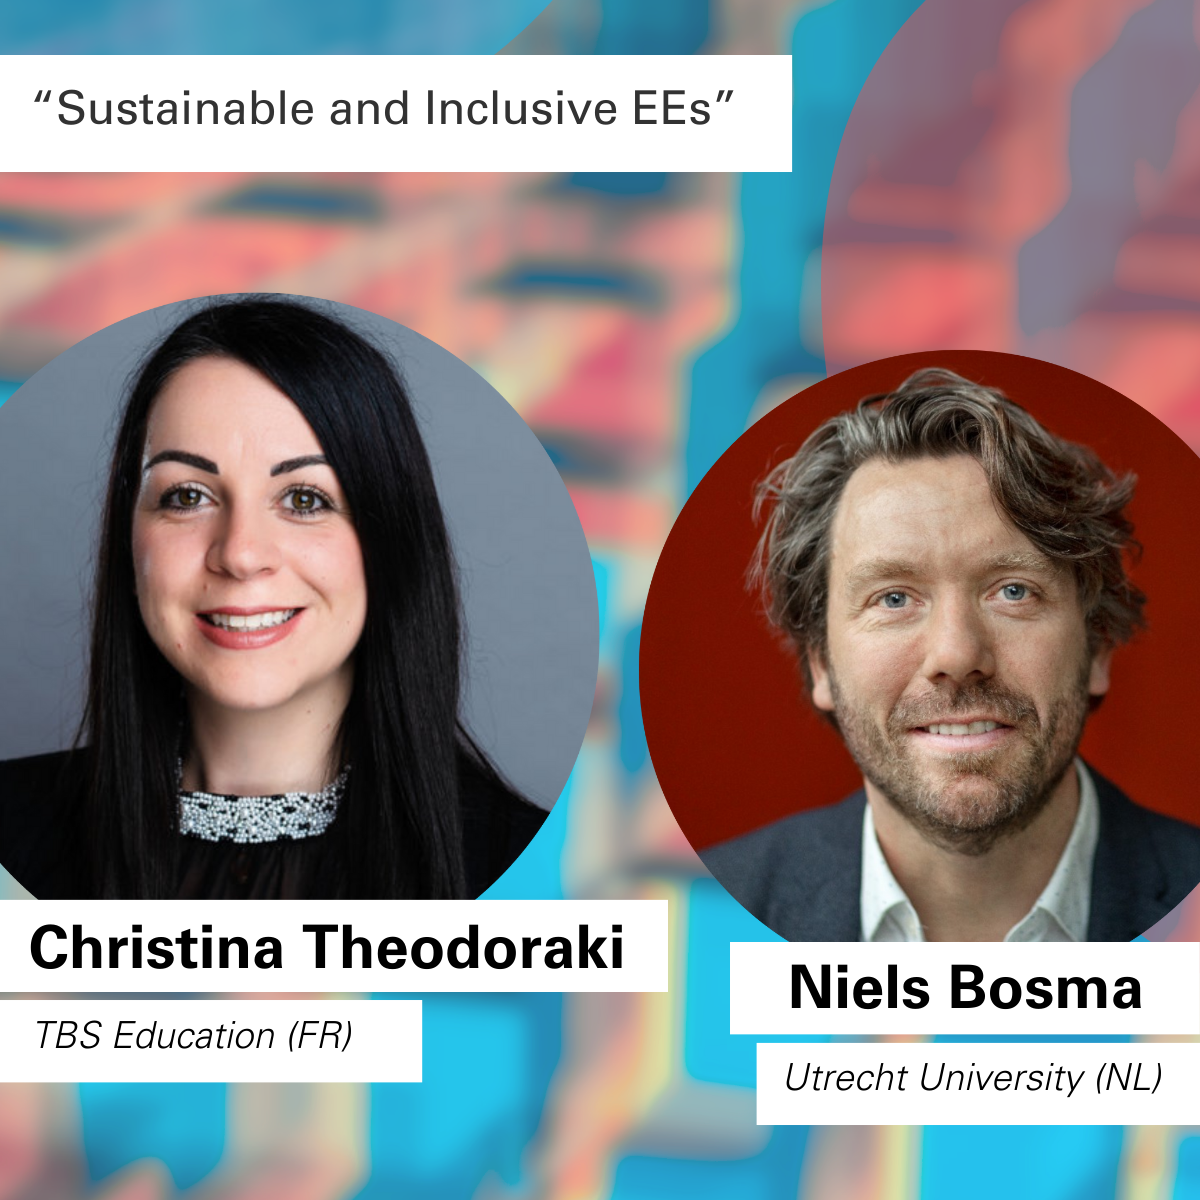 Christina Theodoraki (TBS Education, FR) and Niels Bosma (Utrecht University, NL) will be our expert speakers on the topic "Sustainable and Inclusive EEs".